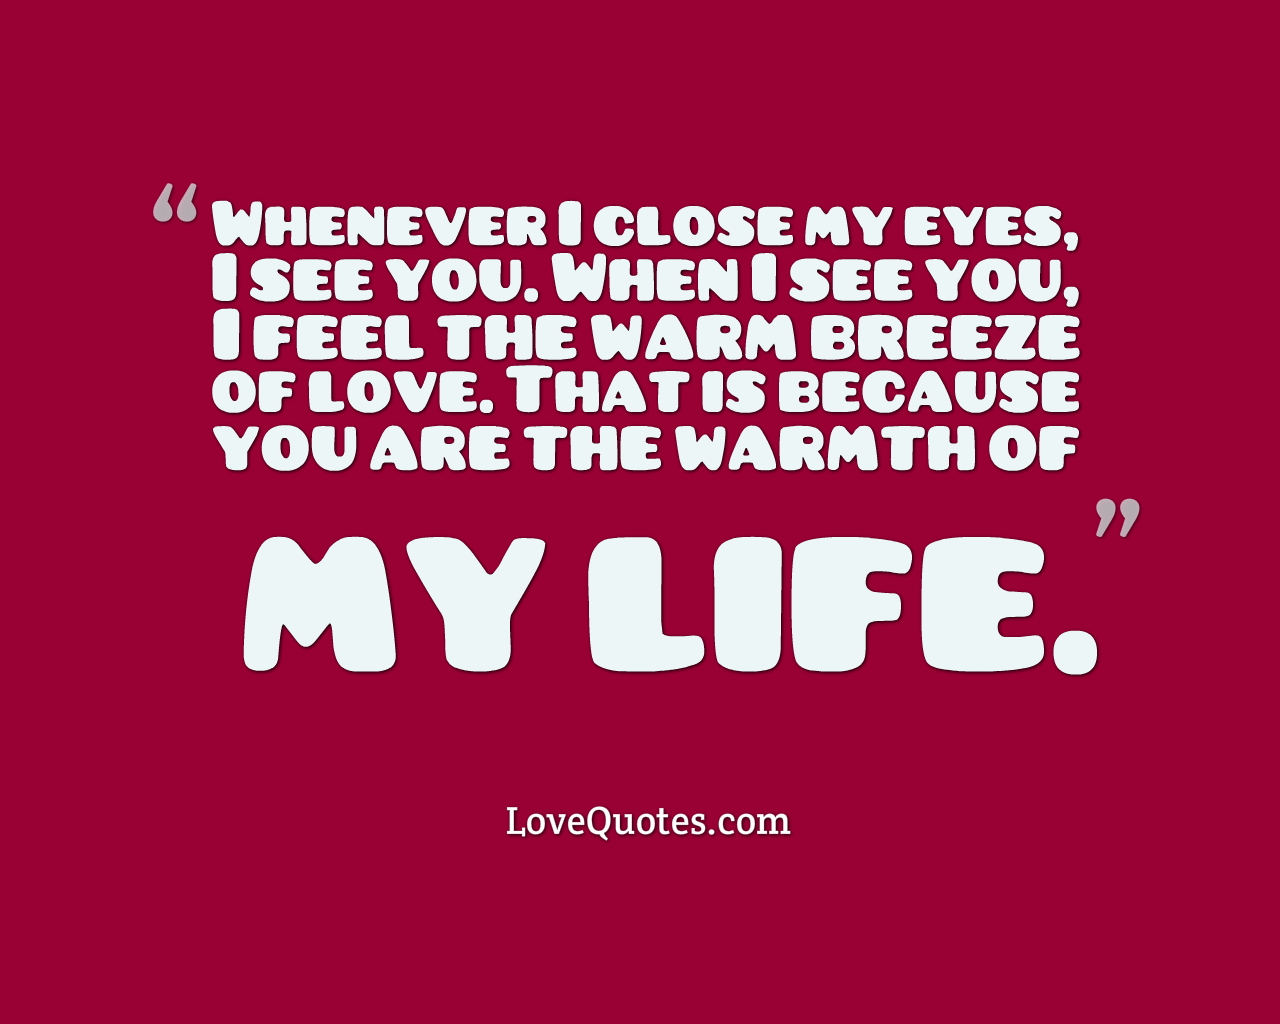 Love Quotes to help you say I Love You - LoveQuotes.com